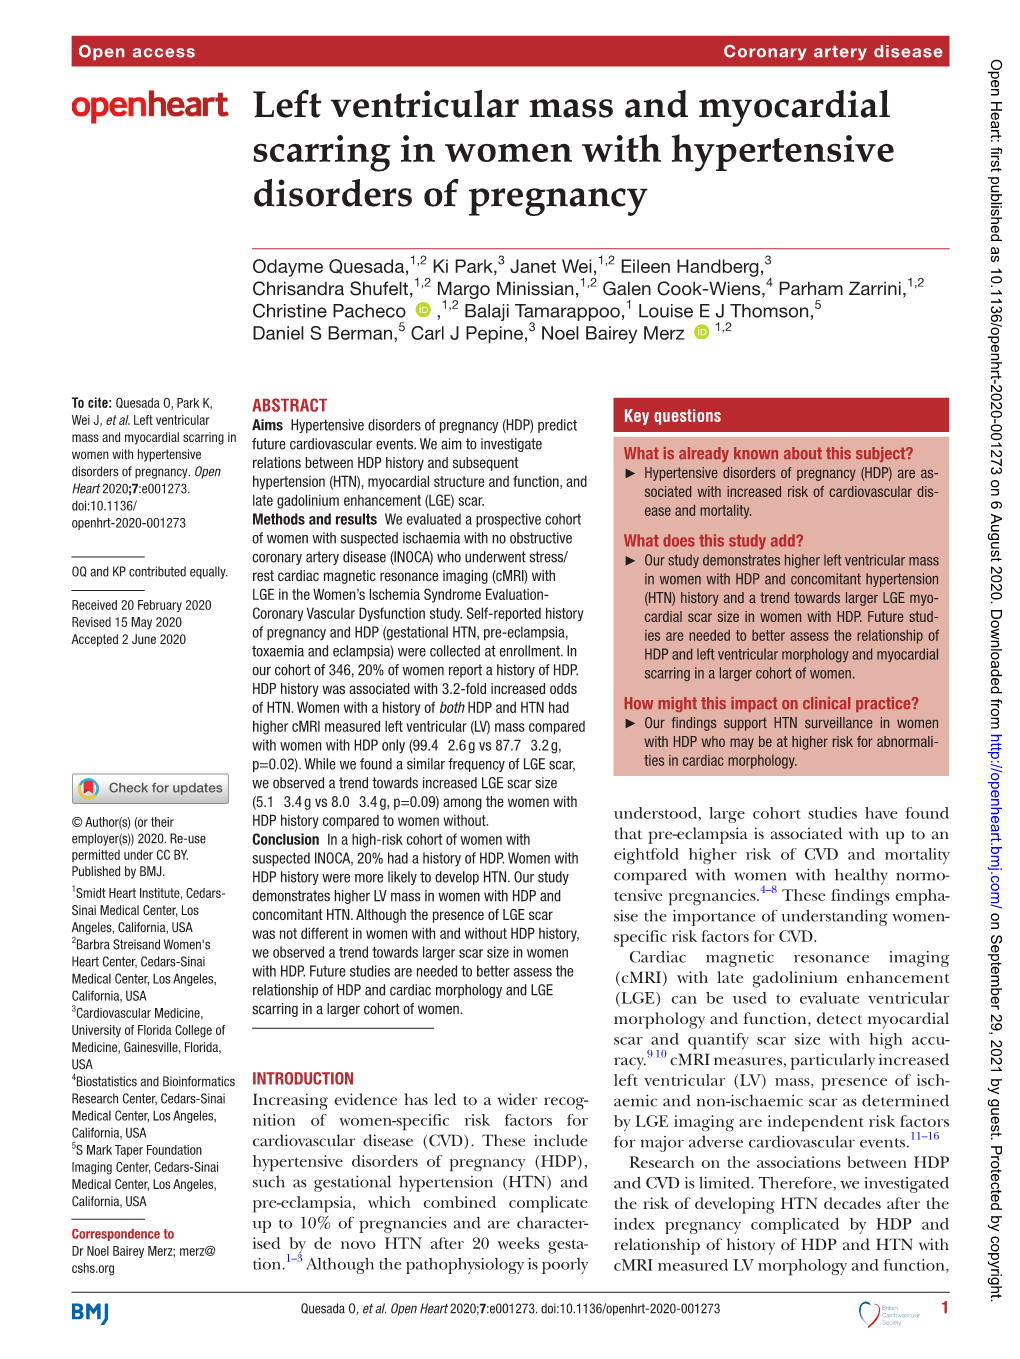 Left Ventricular Mass and Myocardial Scarring in Women with Hypertensive Disorders of Pregnancy